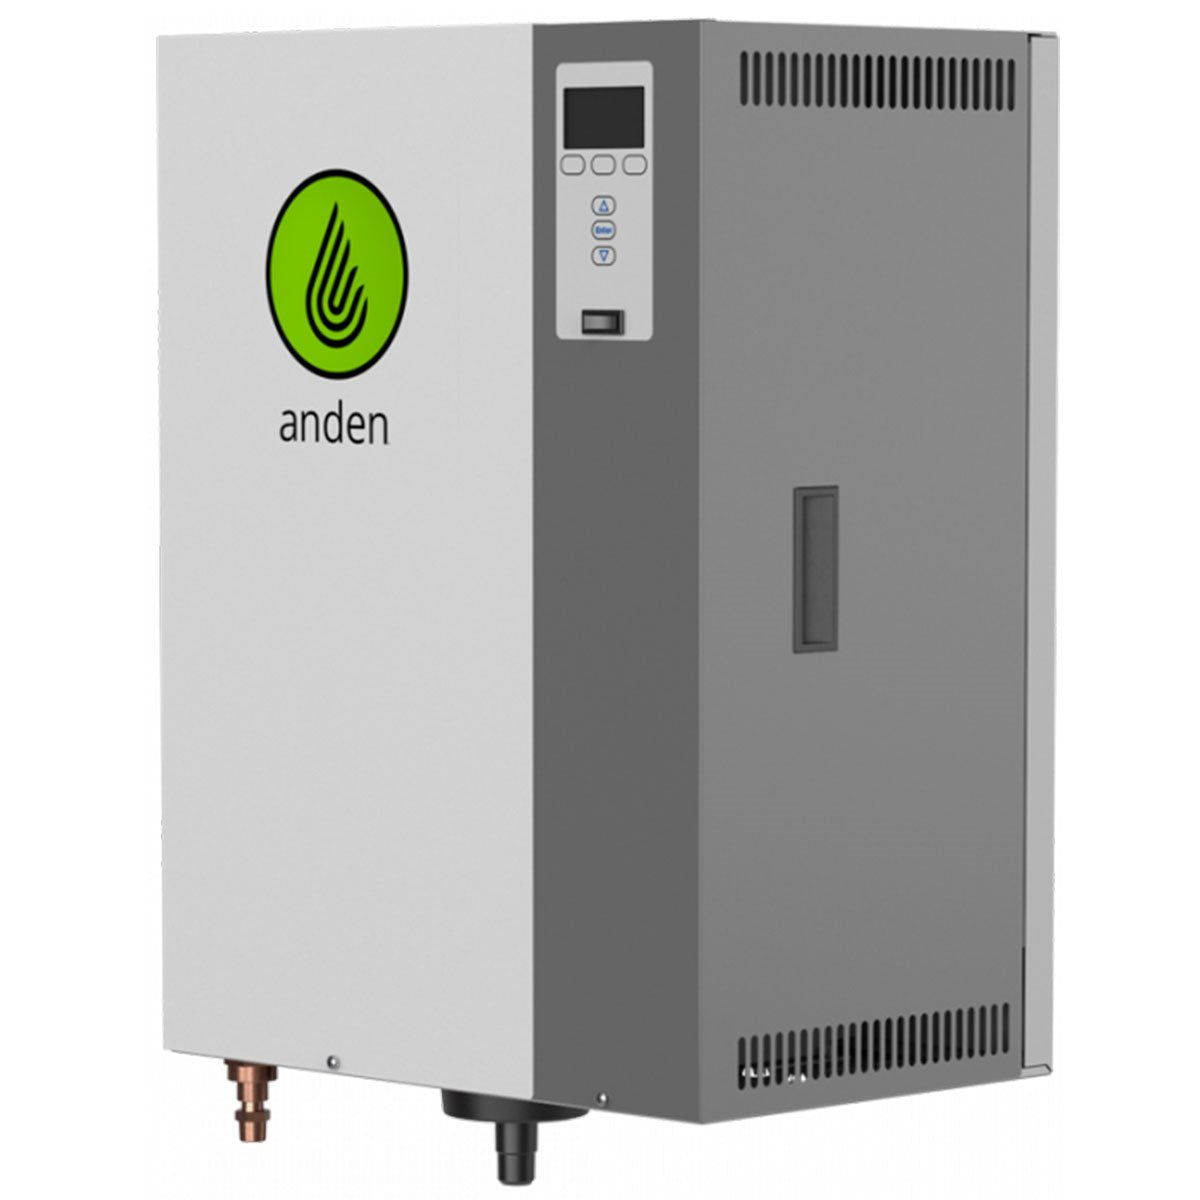 Product Secondary Image:Anden High-Capacity Steam Humidifier